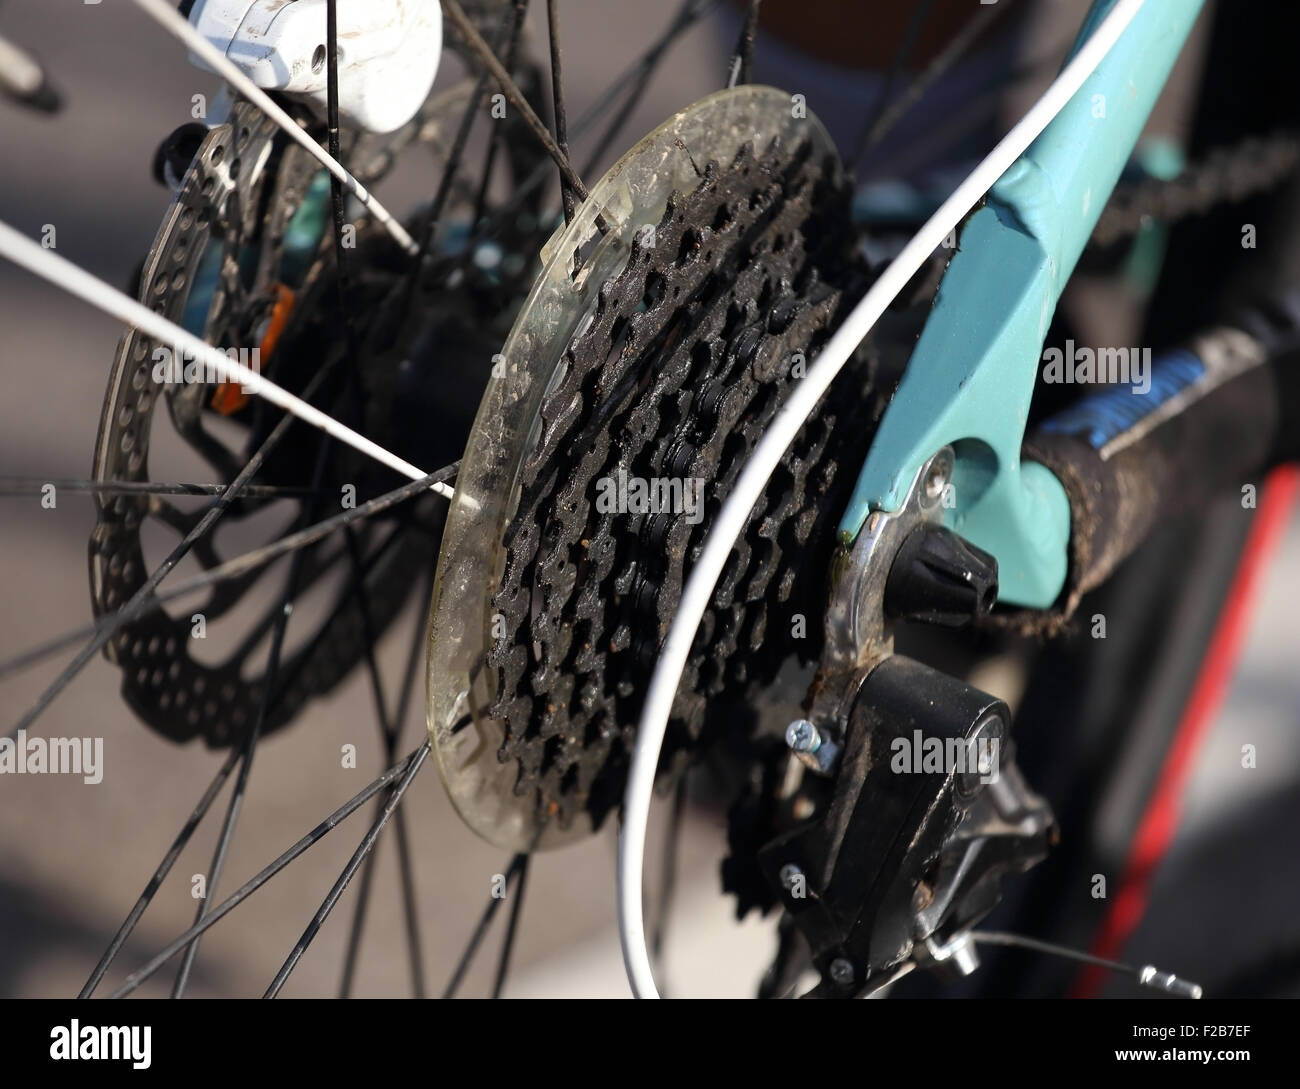 close-up of Bicycle gears and rear derailleur Stock Photo